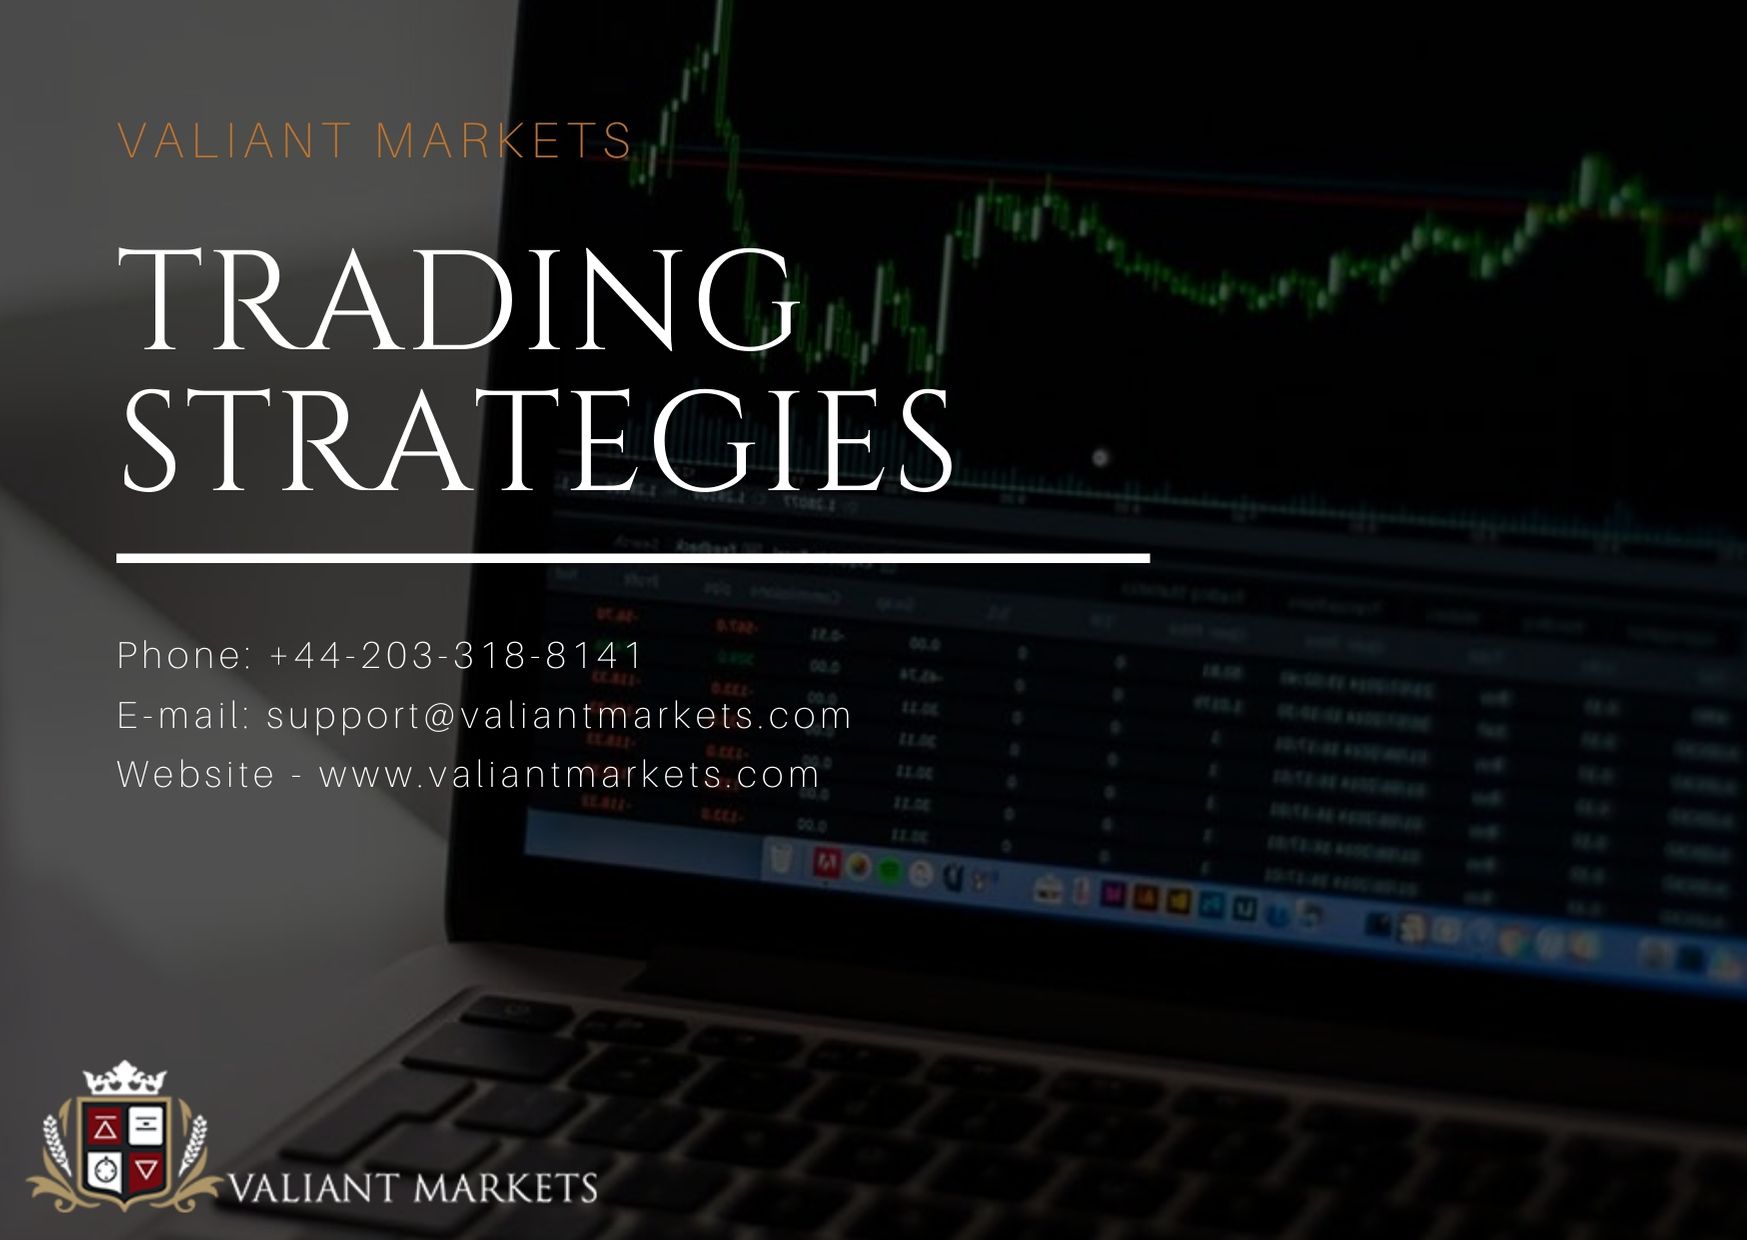 Why Choose Valiant Markets for Trading